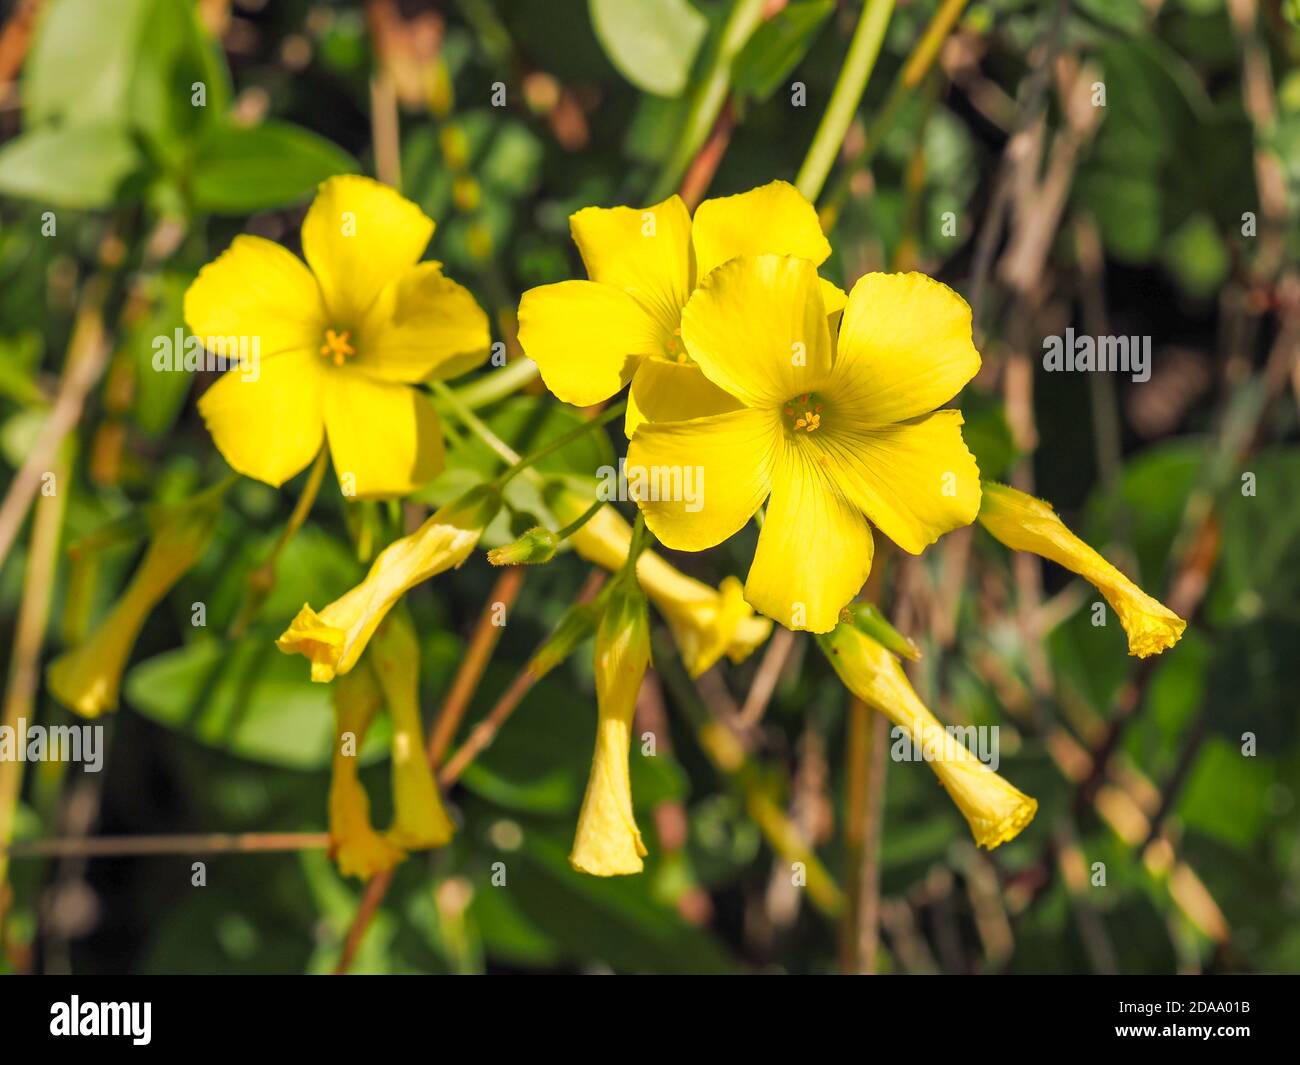 Yellow Oxalis pes-caprae, Bermuda buttercup or African wood-sorrel flowers. Buttercup oxalis is flowering plant in the wood sorrel family Oxalidaceae. Stock Photo